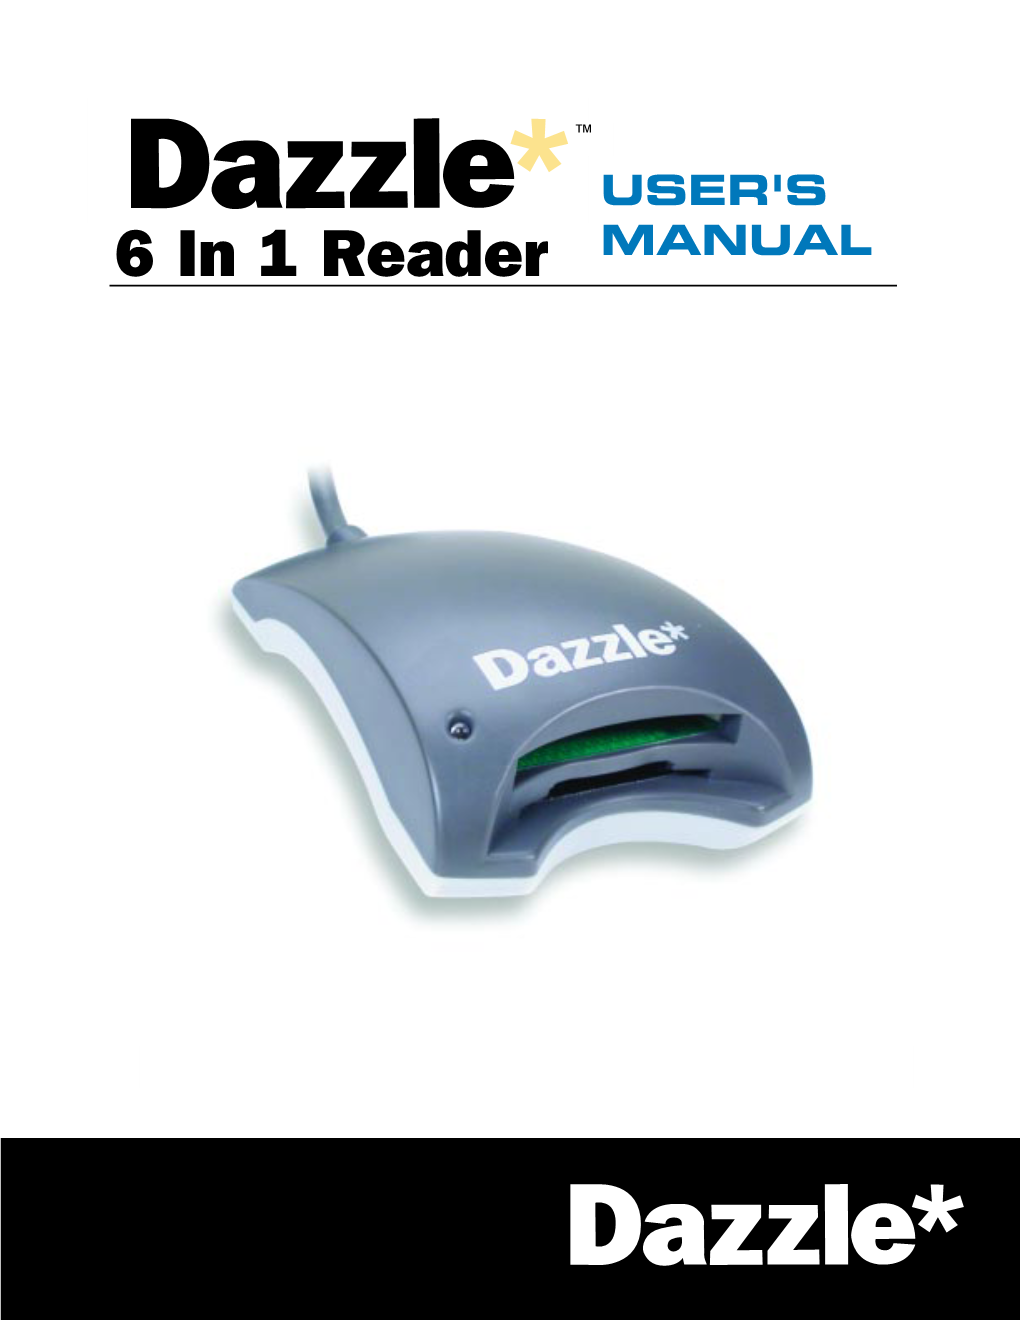 Troubleshooting Your Dazzle 6 in 1 Reader